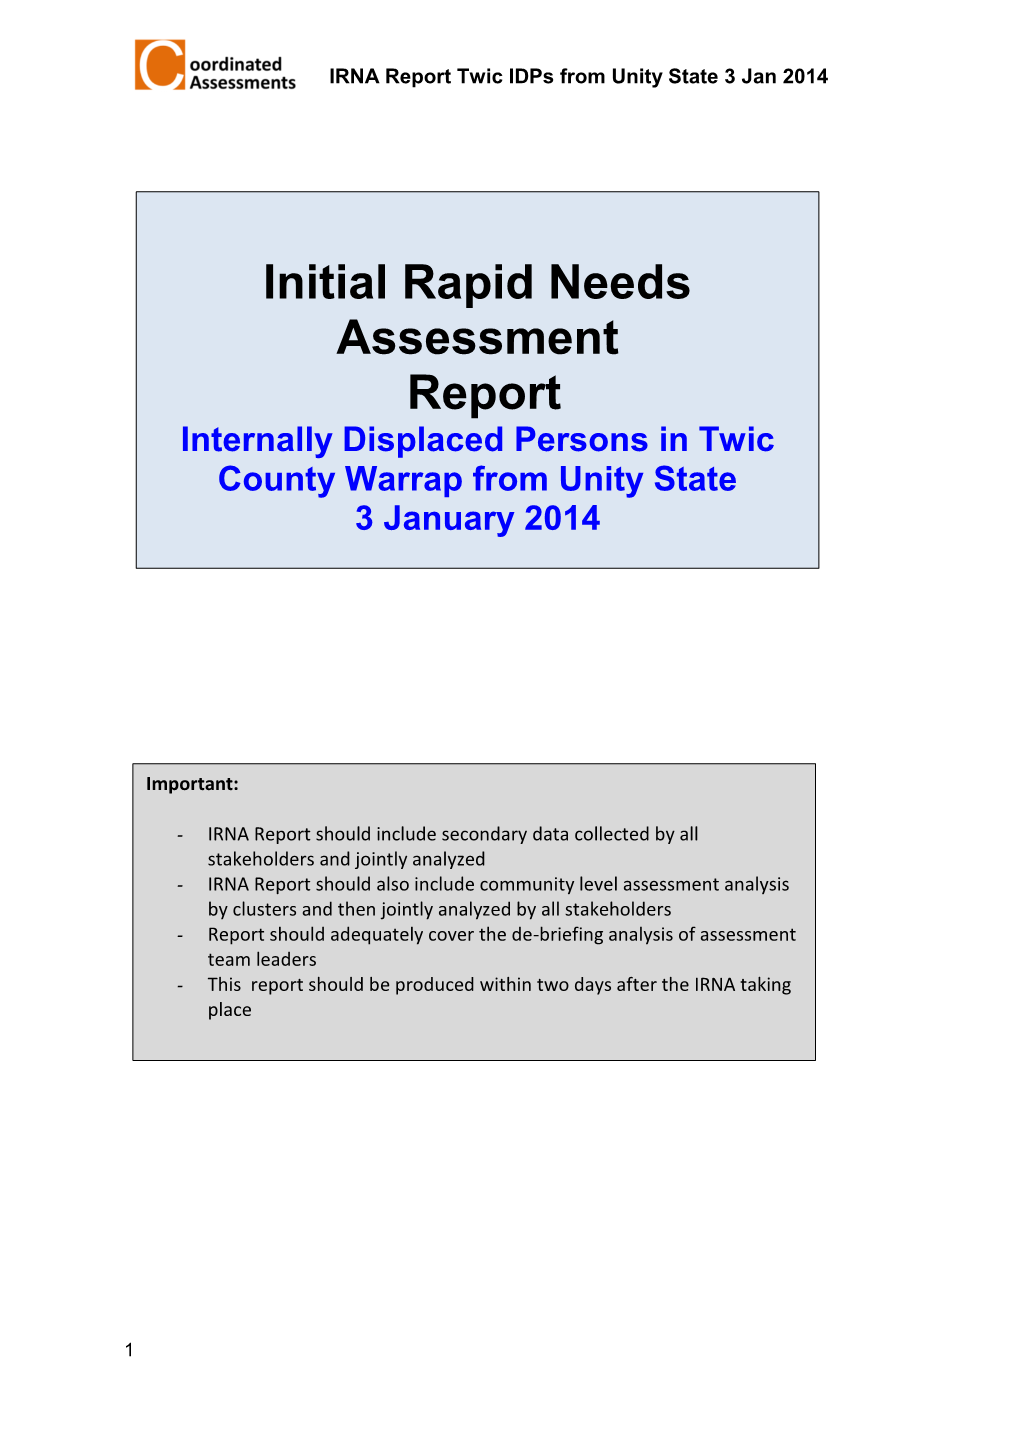 Initial Rapid Needs Assessment Report Internally Displaced Persons in Twic County Warrap from Unity State 3 January 2014